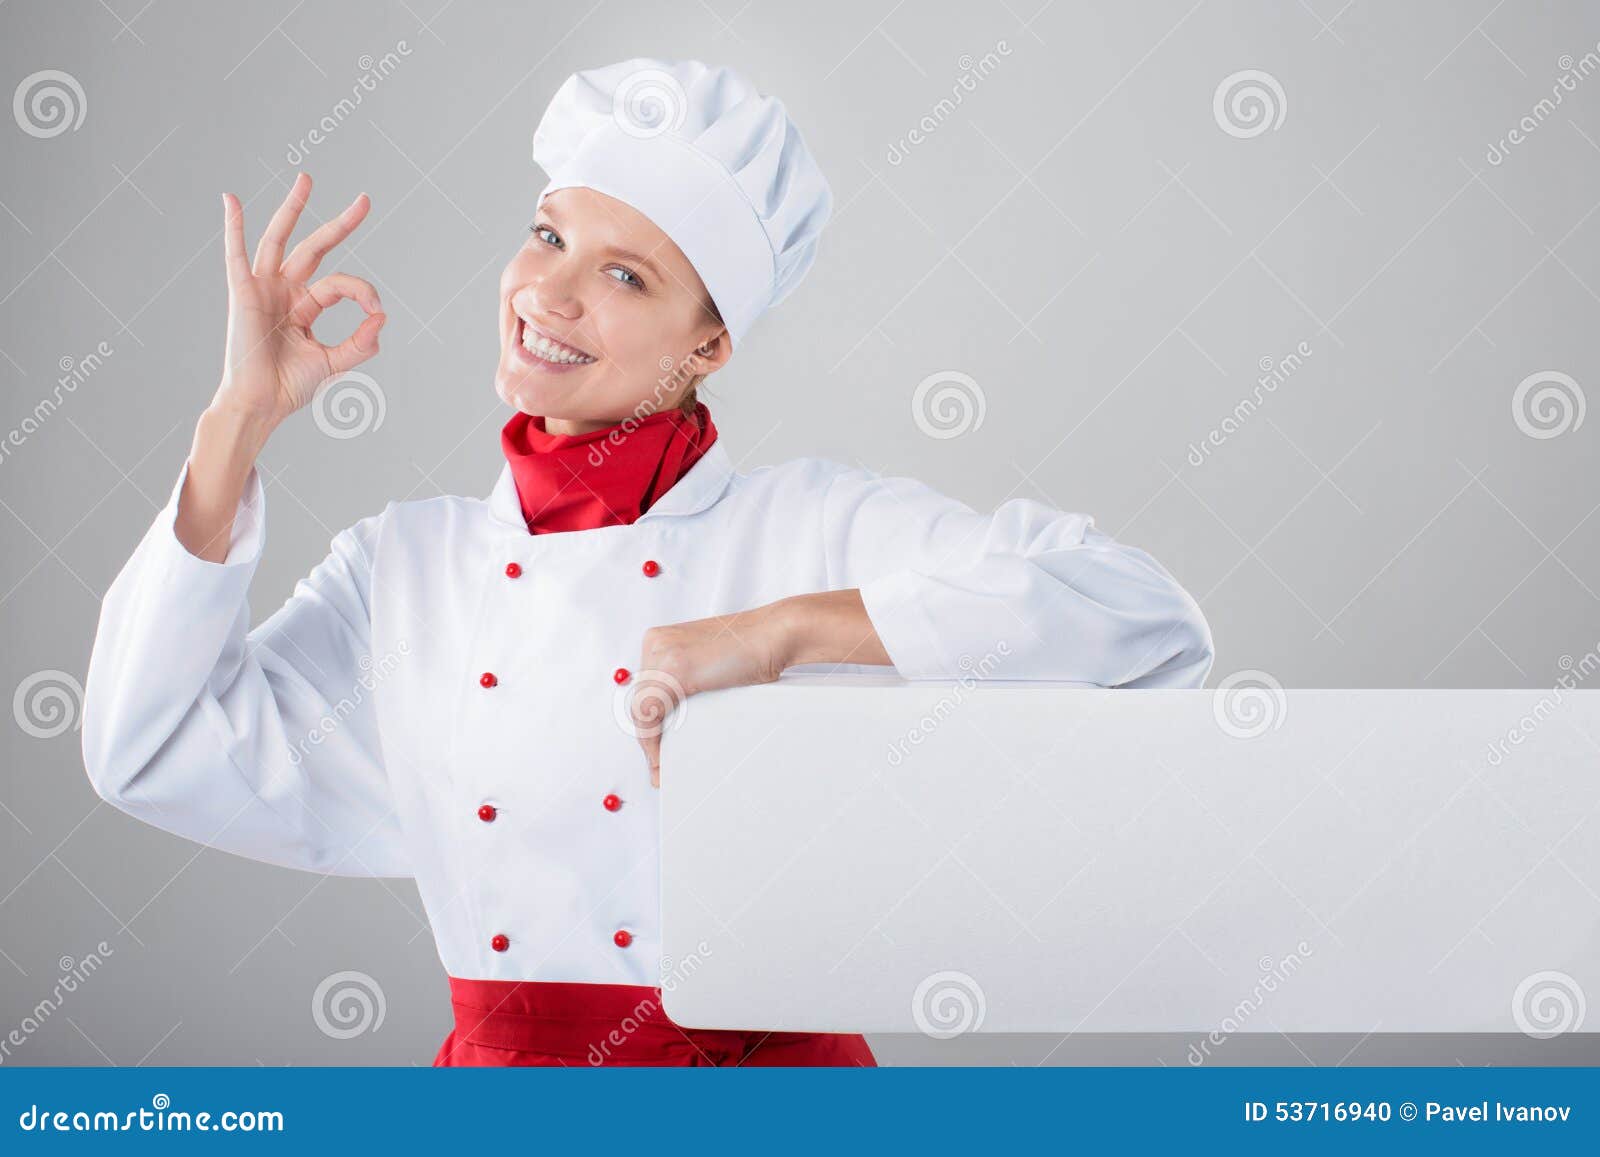 Woman cook stock photo. Image of advertising, copy, head - 53716940